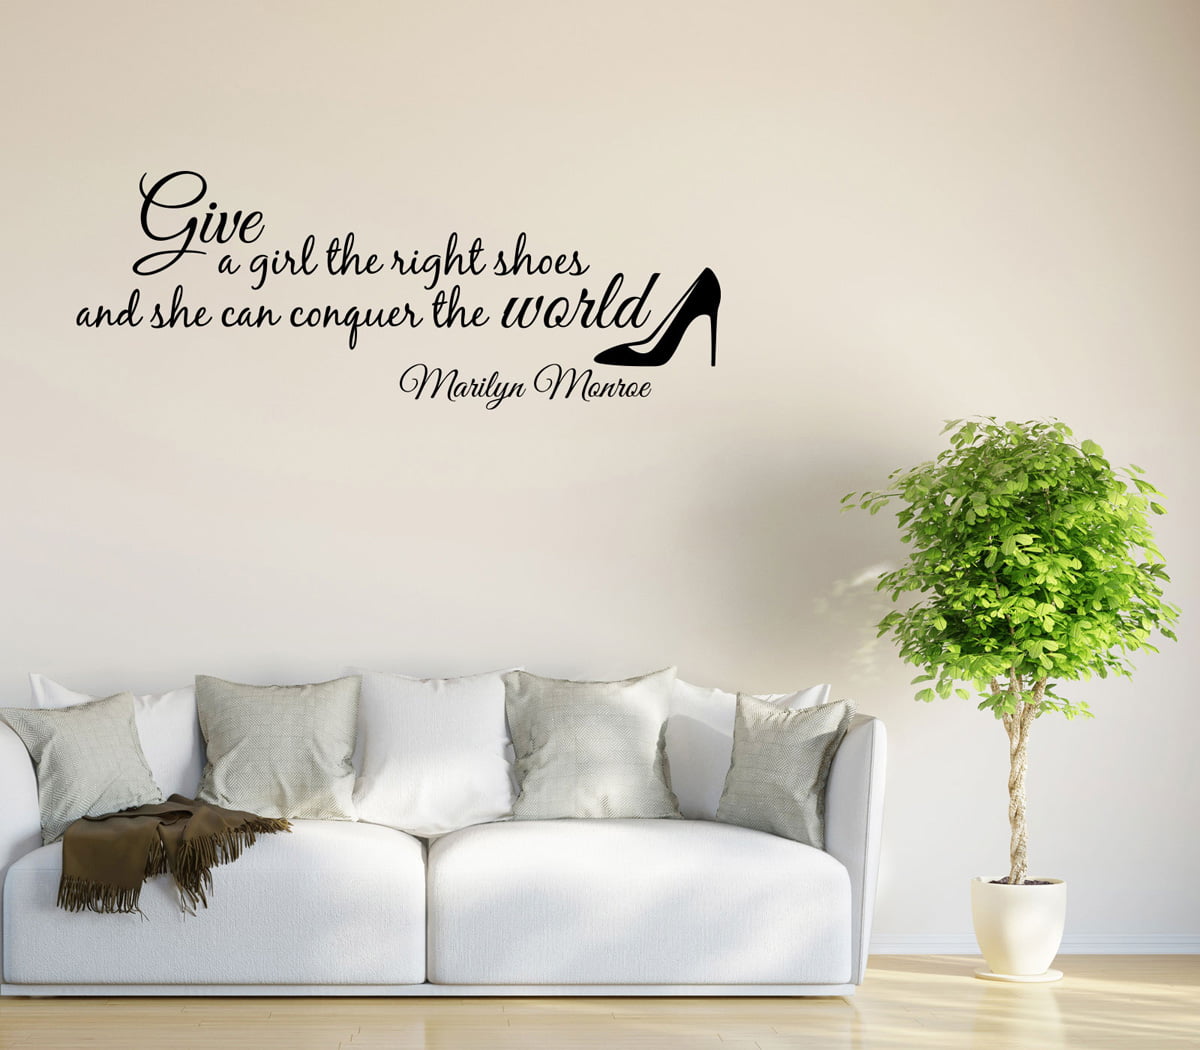 Music is a World Wall Sticker Wall Chick Decal Art Sticker Quote 